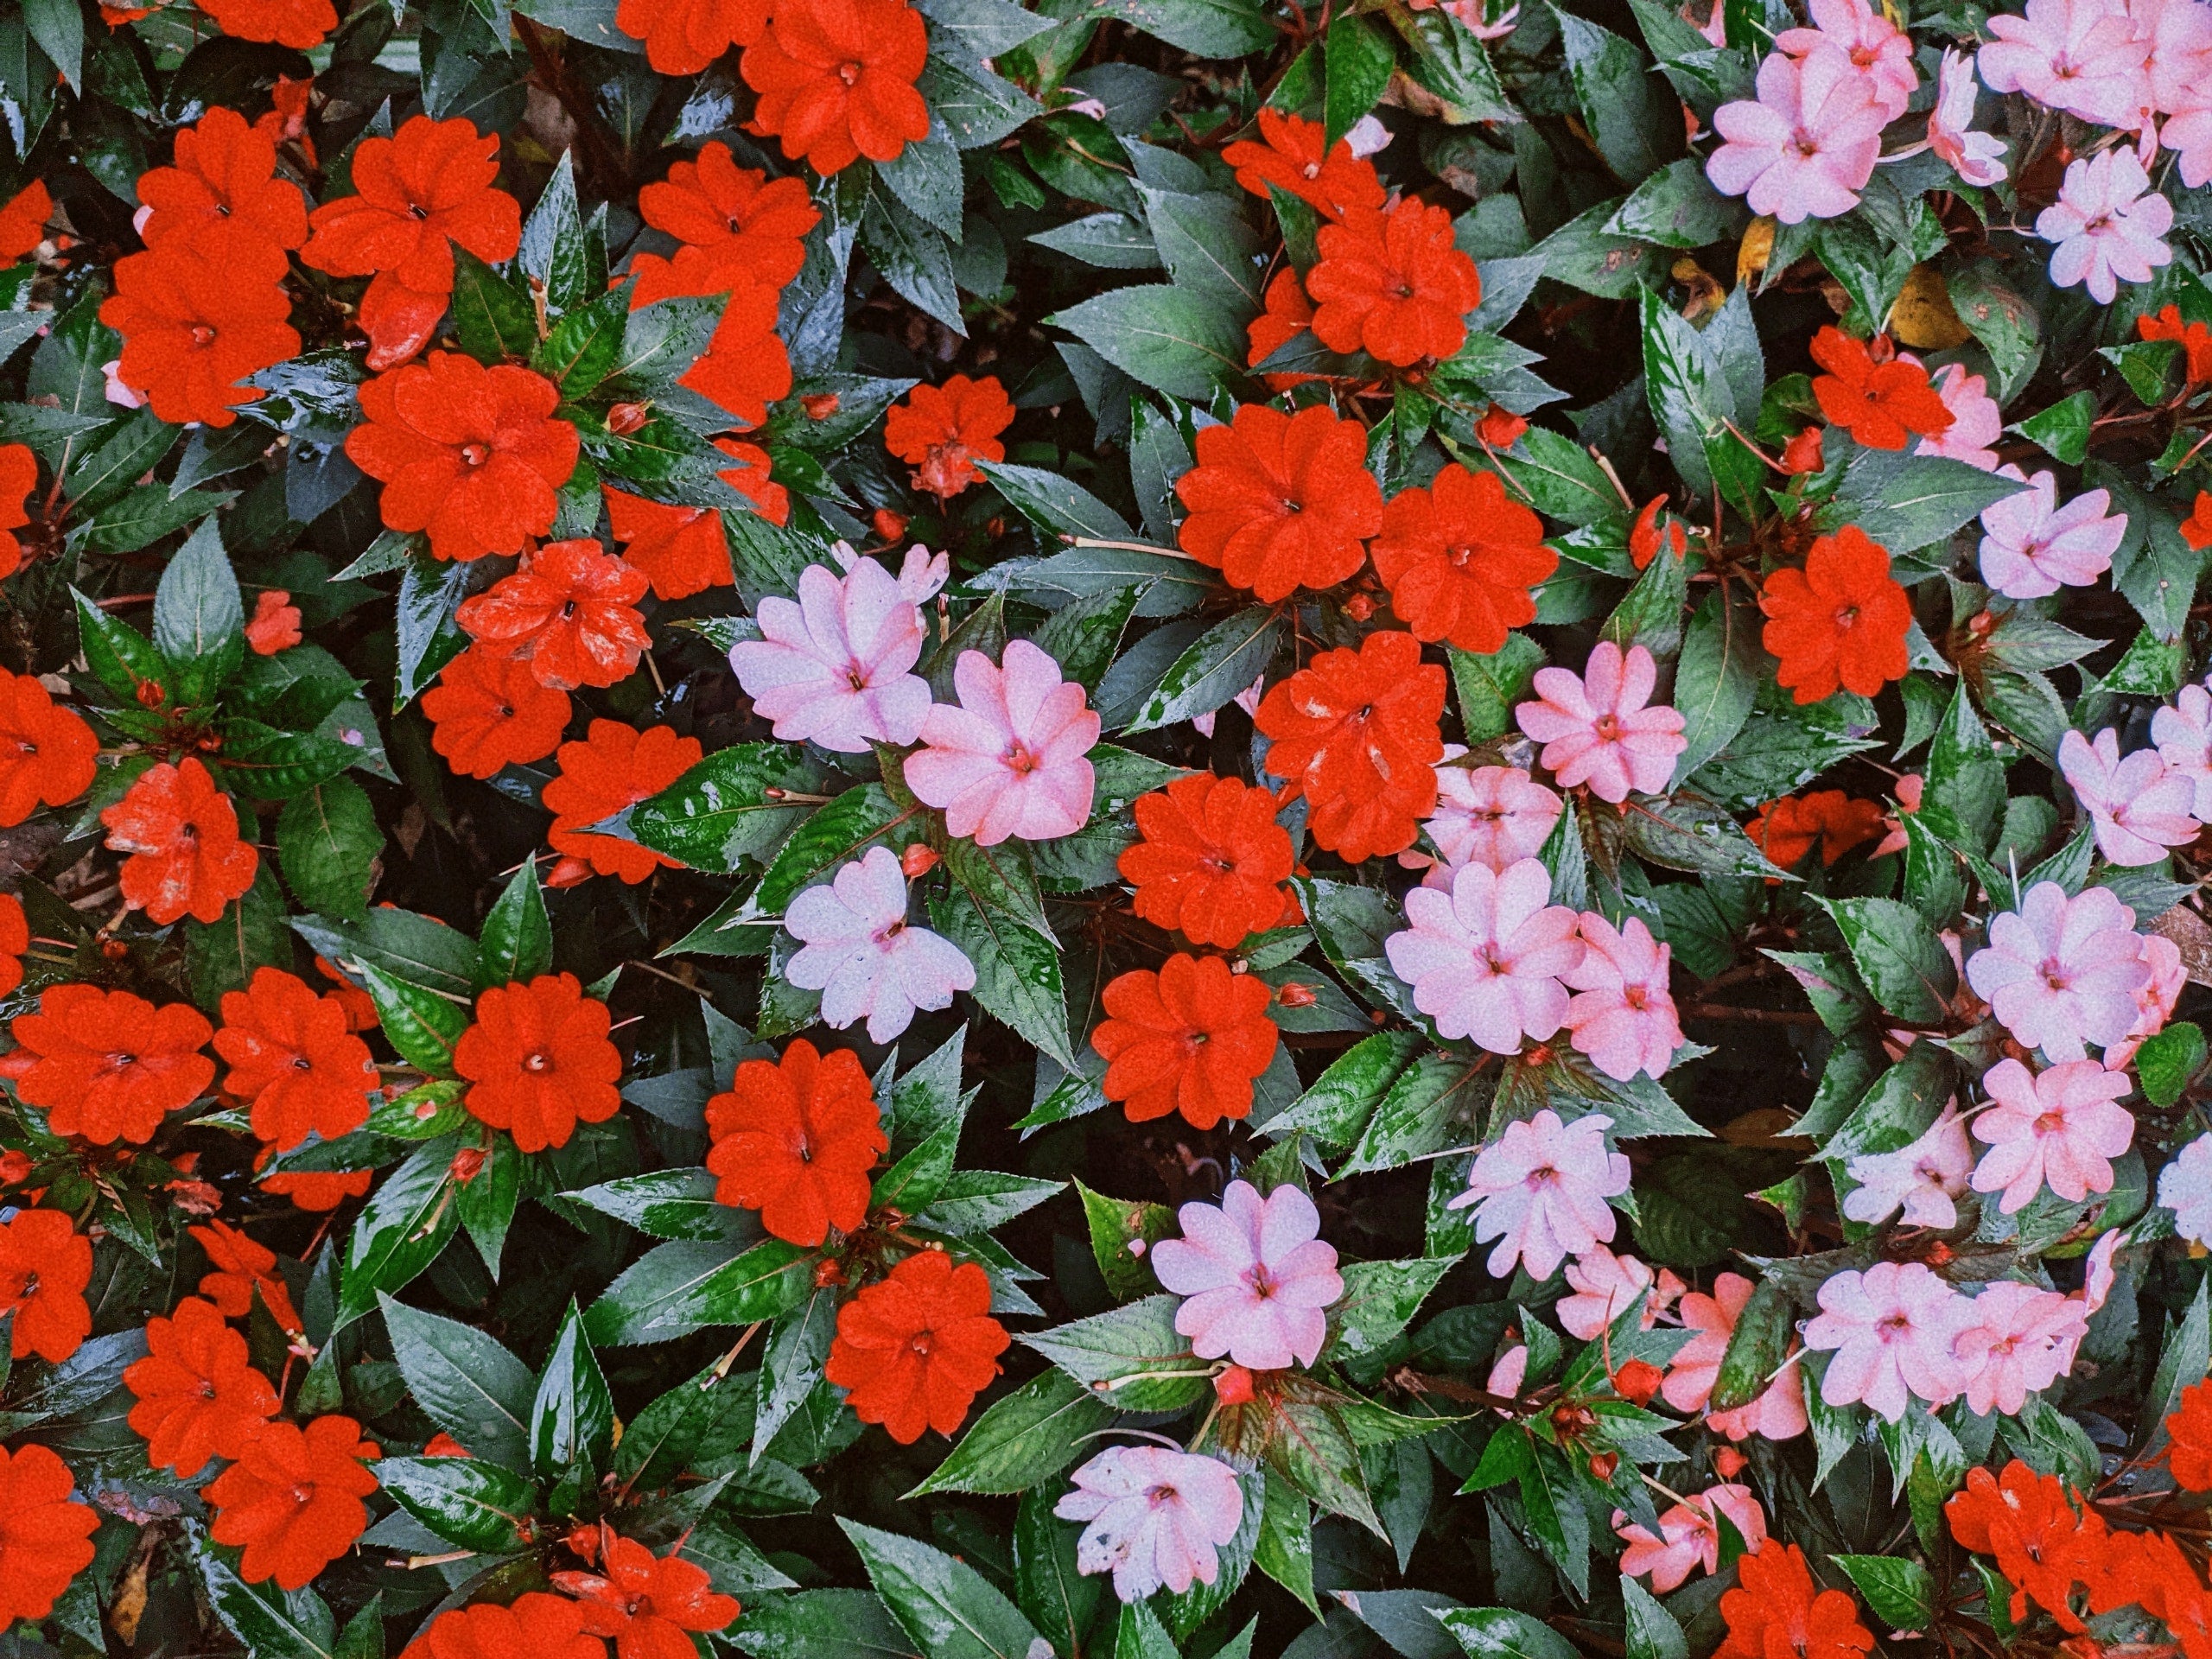 Impatiens: Beautiful Blooms for Every Garden